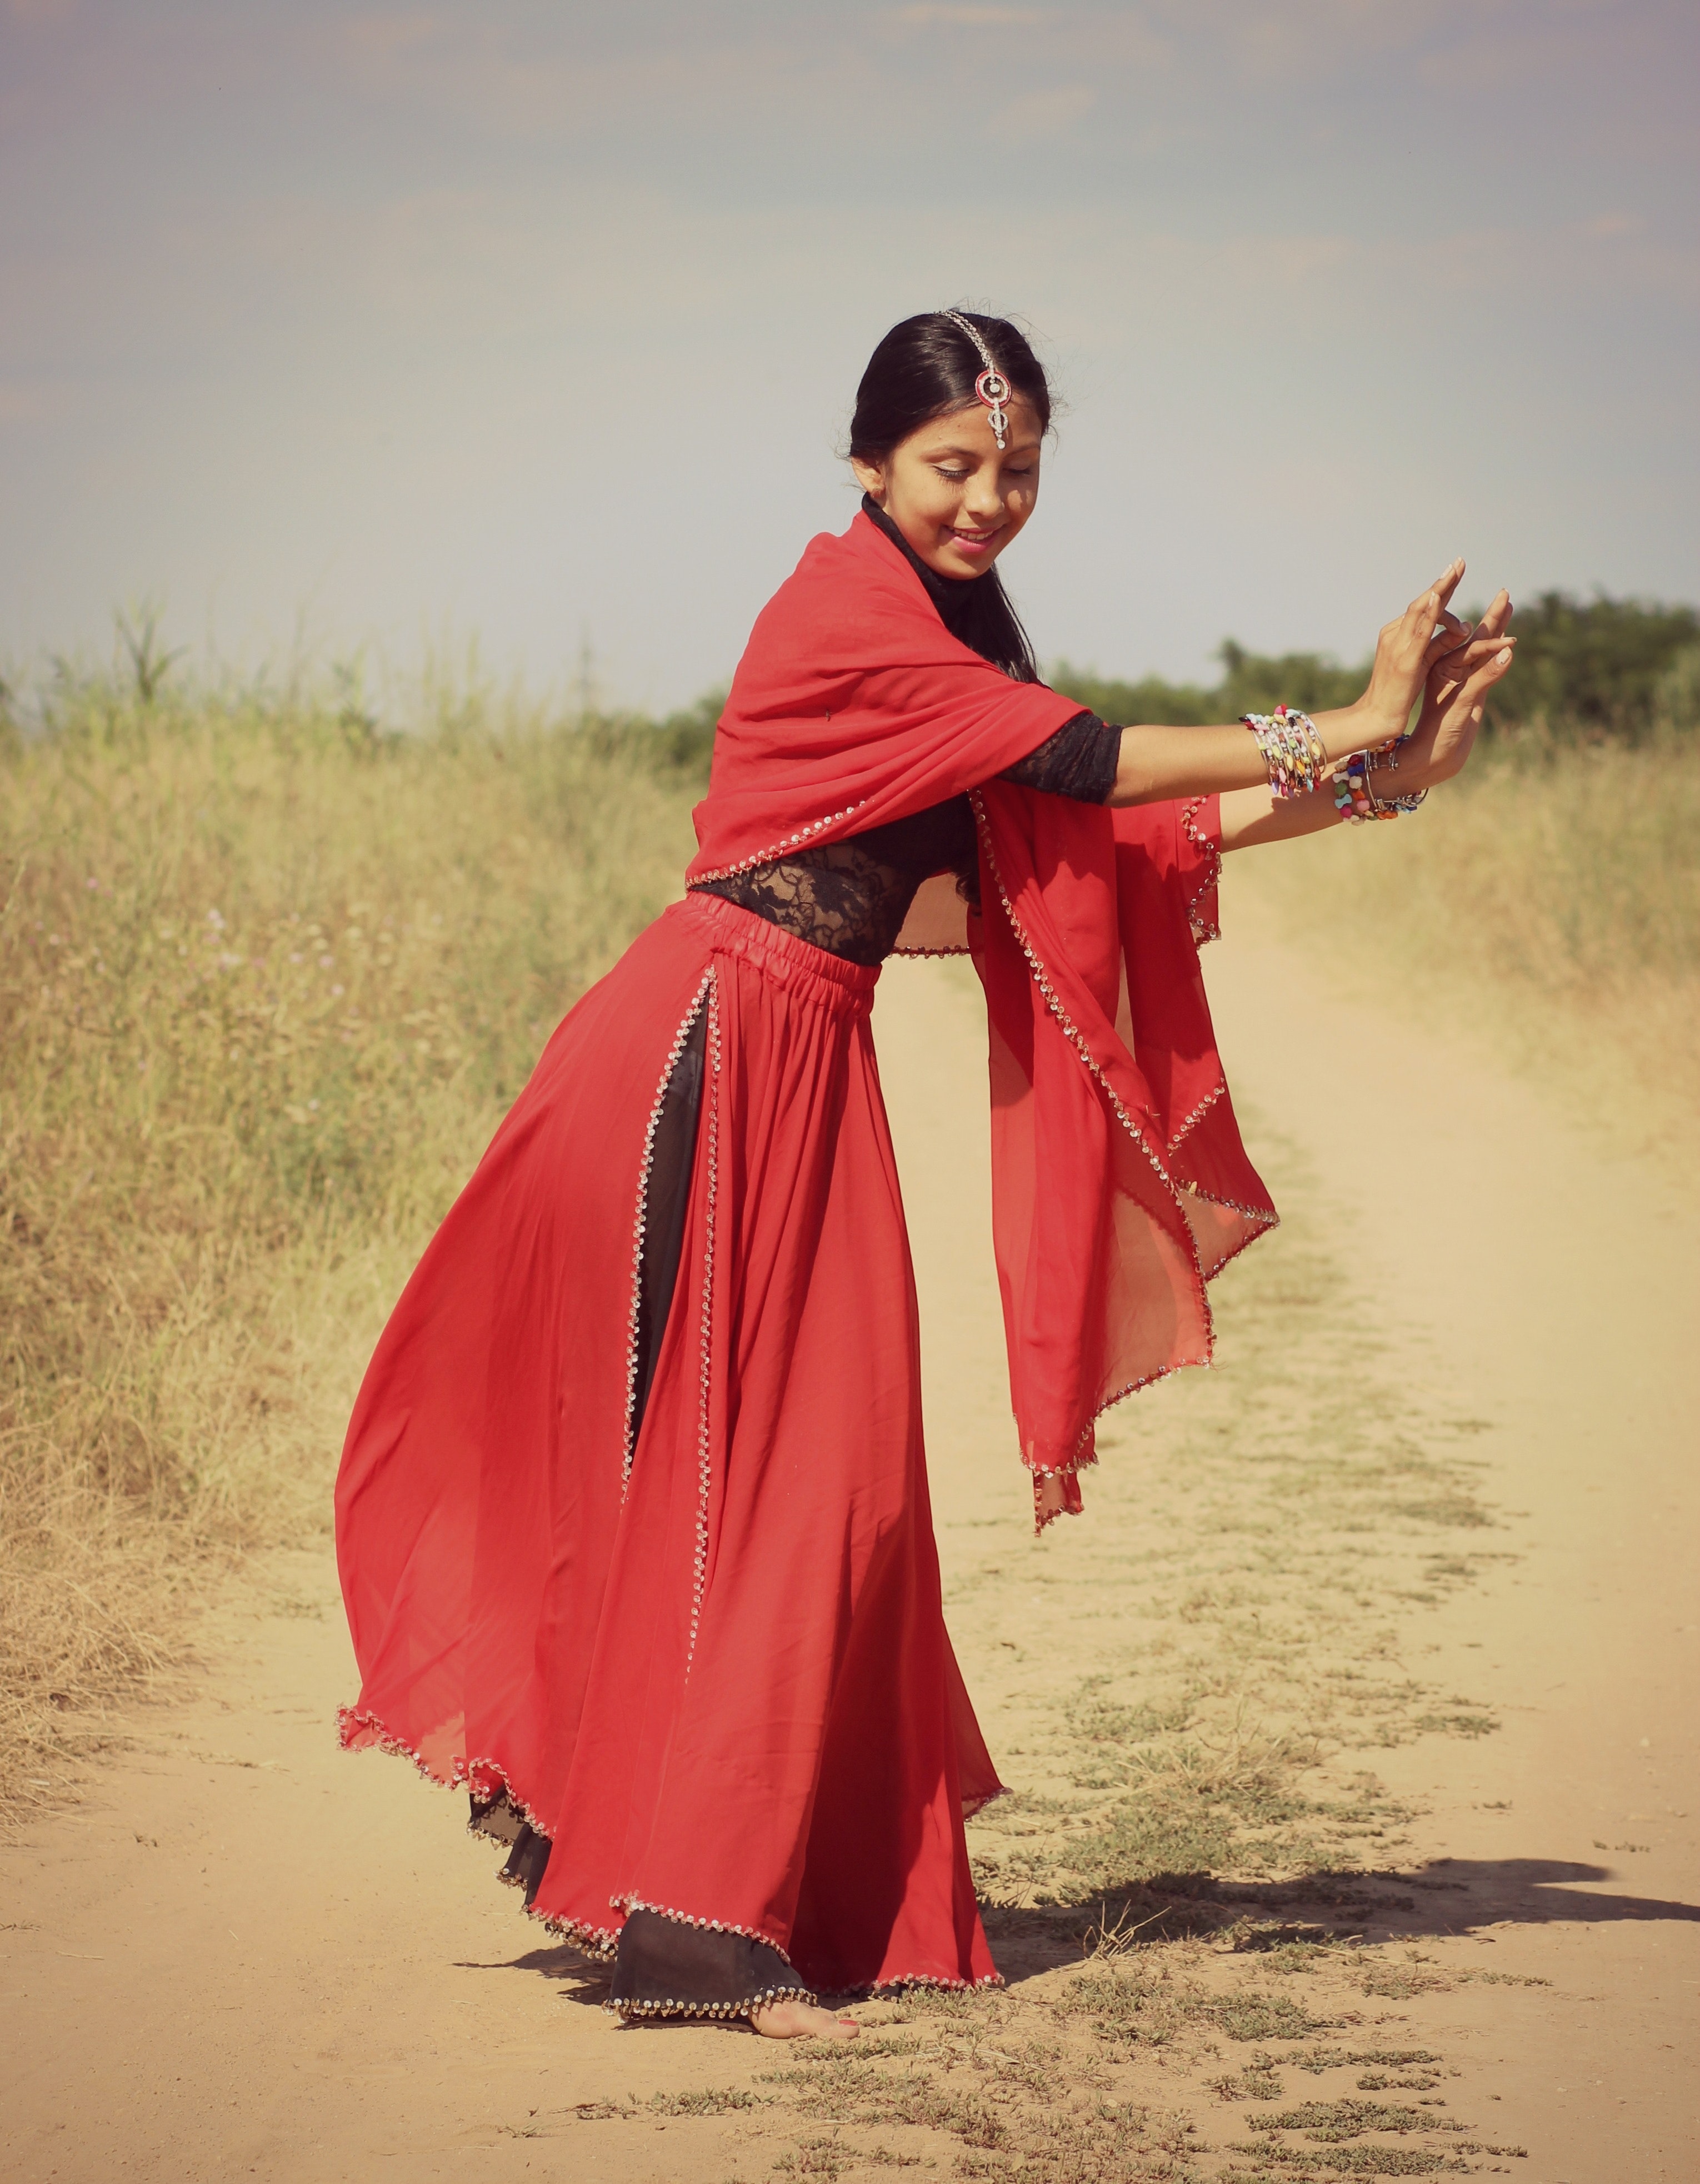 Woman in red and black 3/4 sleeve dress dancing photo